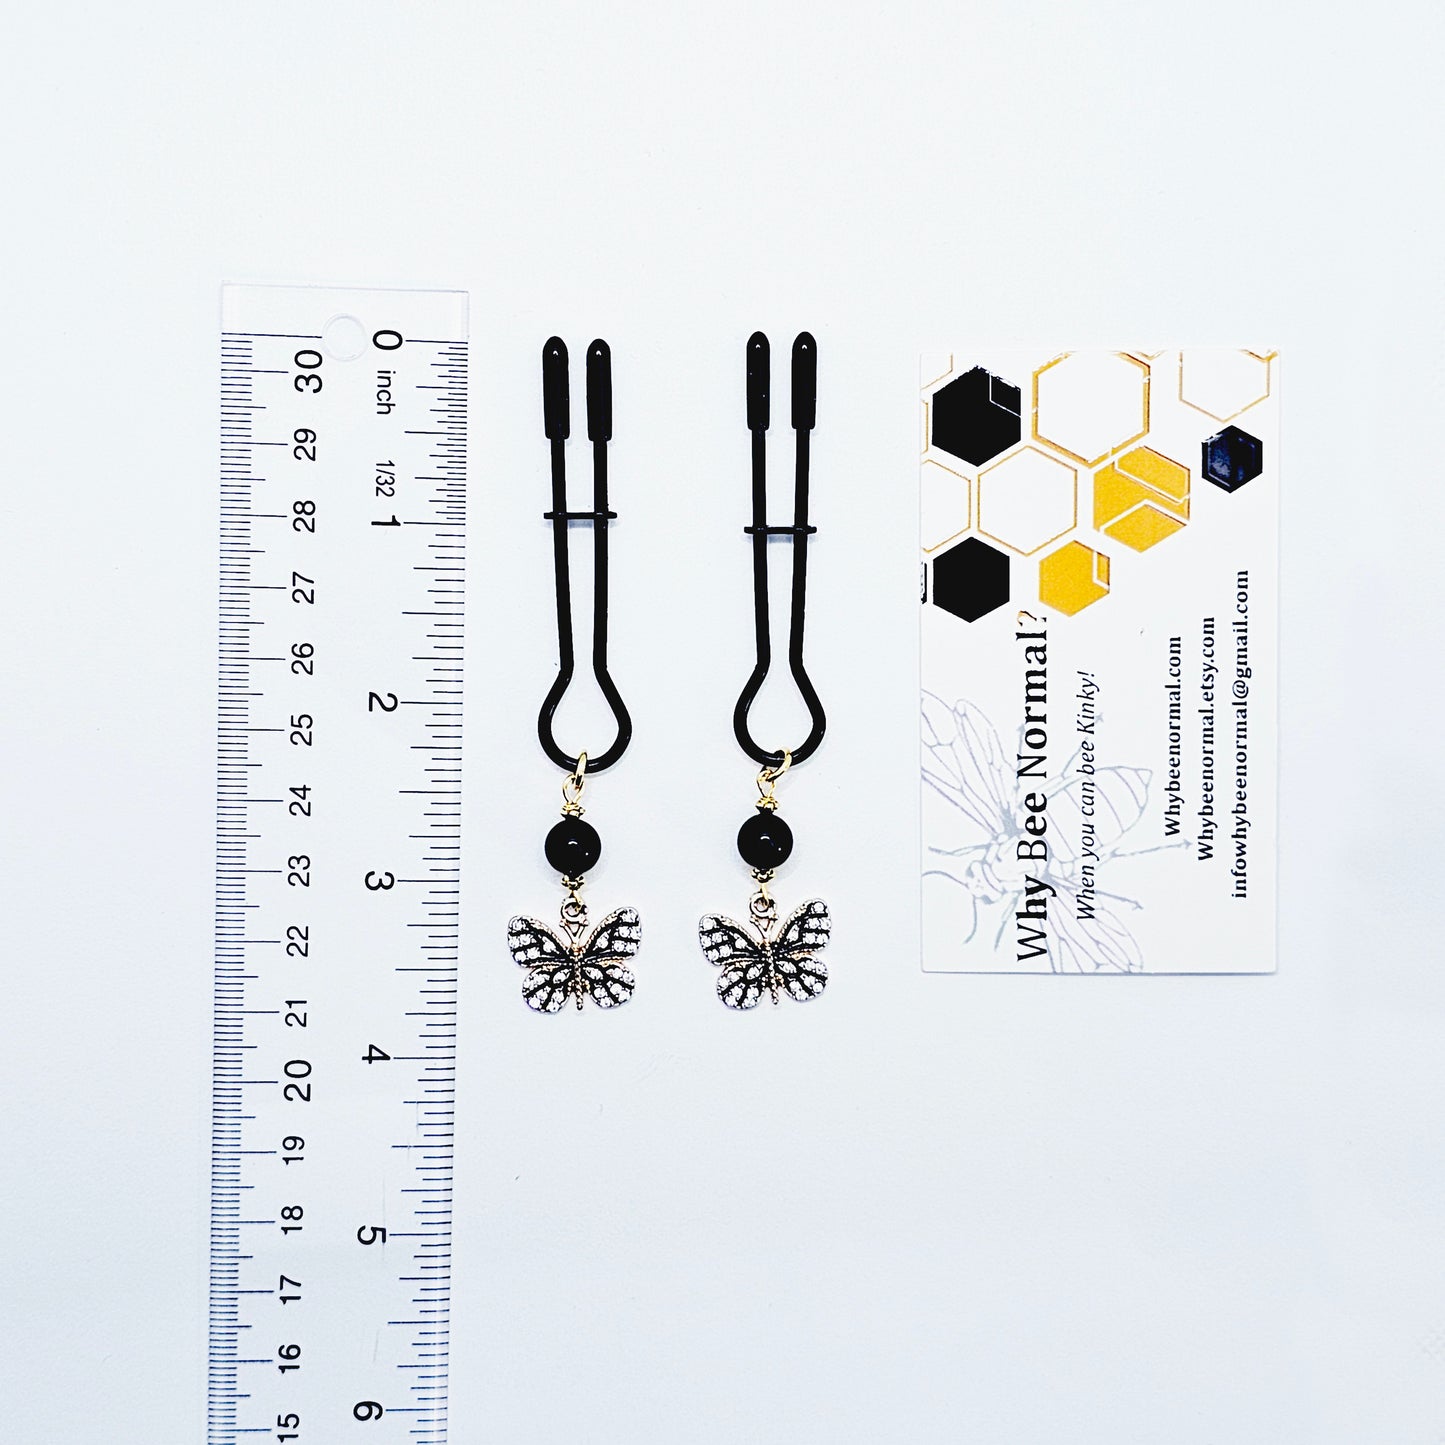 Butterfly Nipple Clamps Black Straight Tweezer Nipple Clamps with Sparkling Butterflies and Black Obsidian Beads